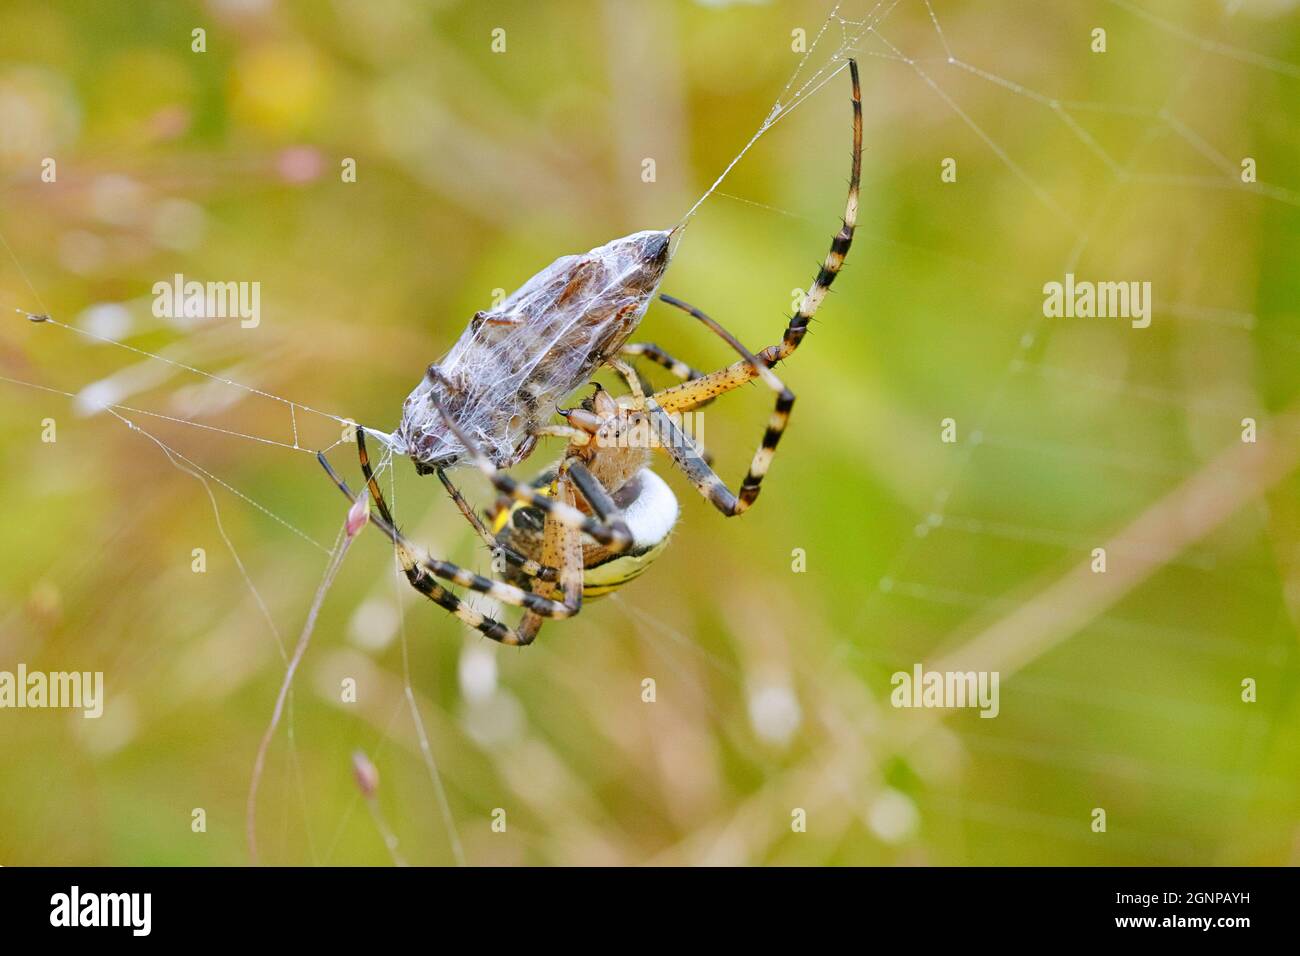 Black-and-yellow argiope, Black-and-yellow garden spider (Argiope bruennichi), wrapping prey, Germany Stock Photo